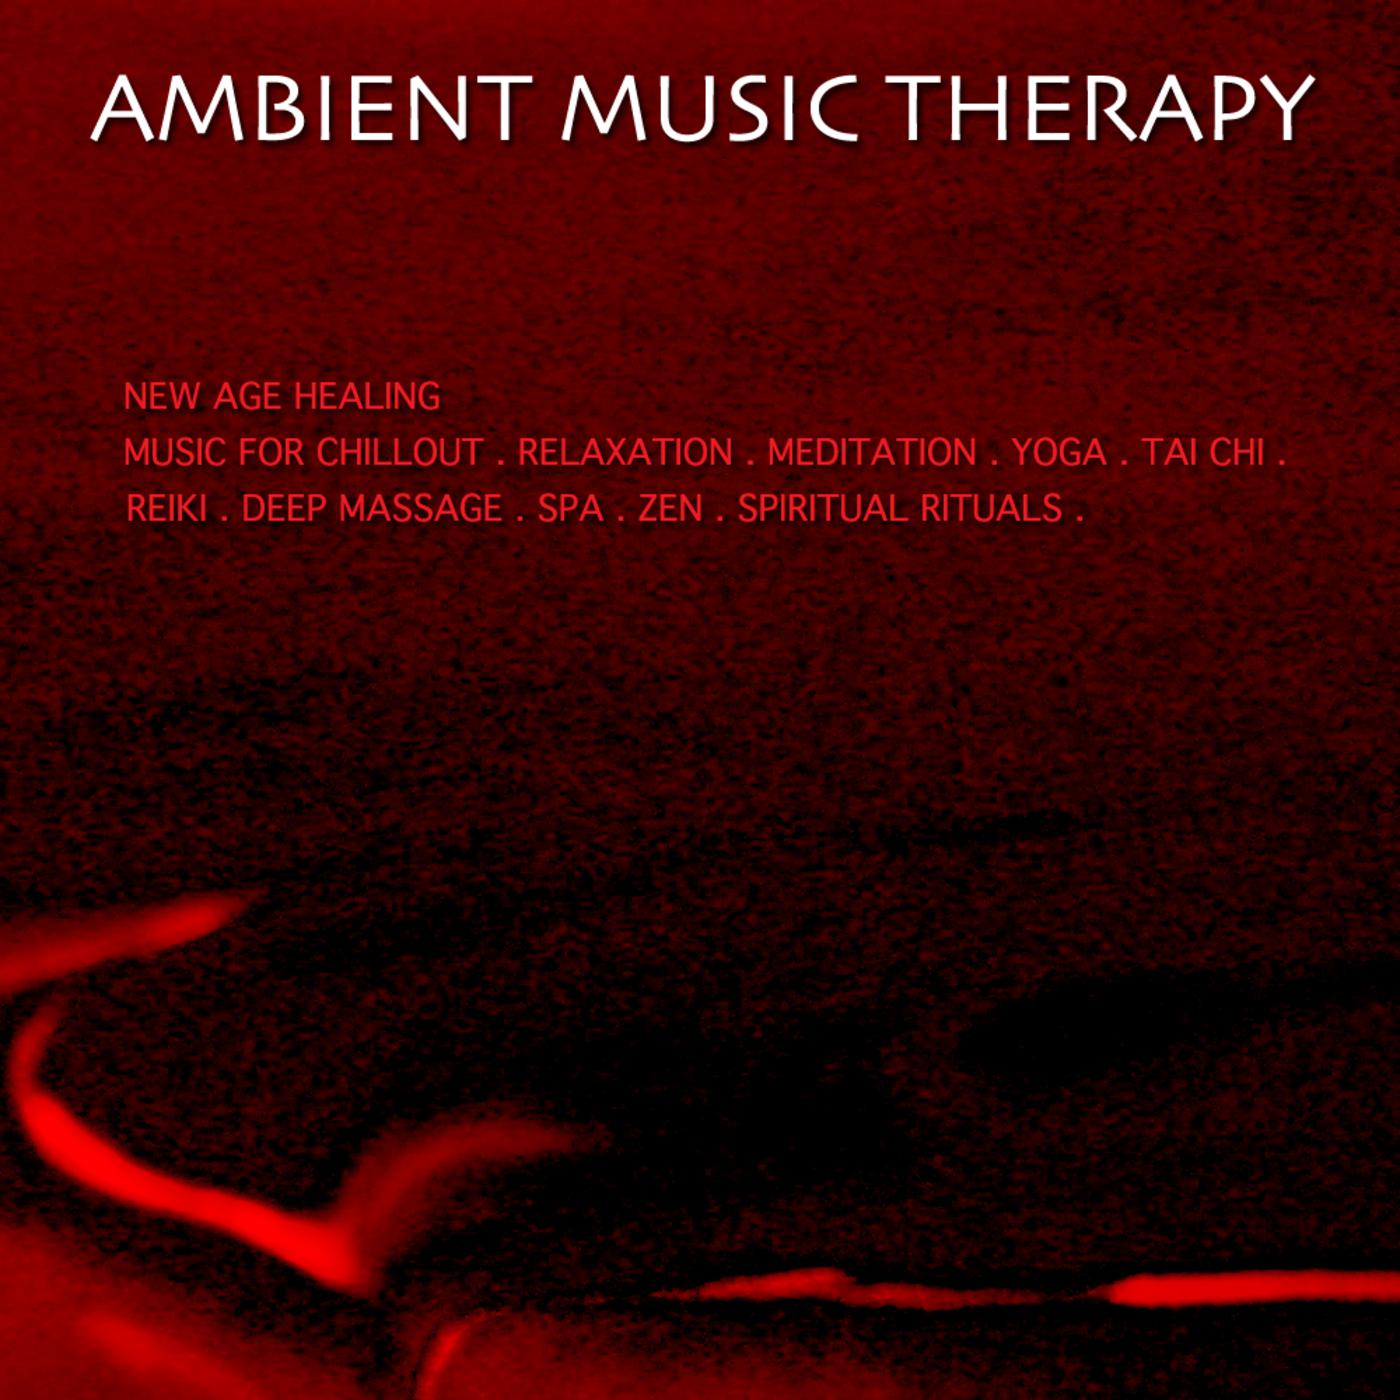 2. New Age Healing Music for Chillout. Relaxation. Meditation...